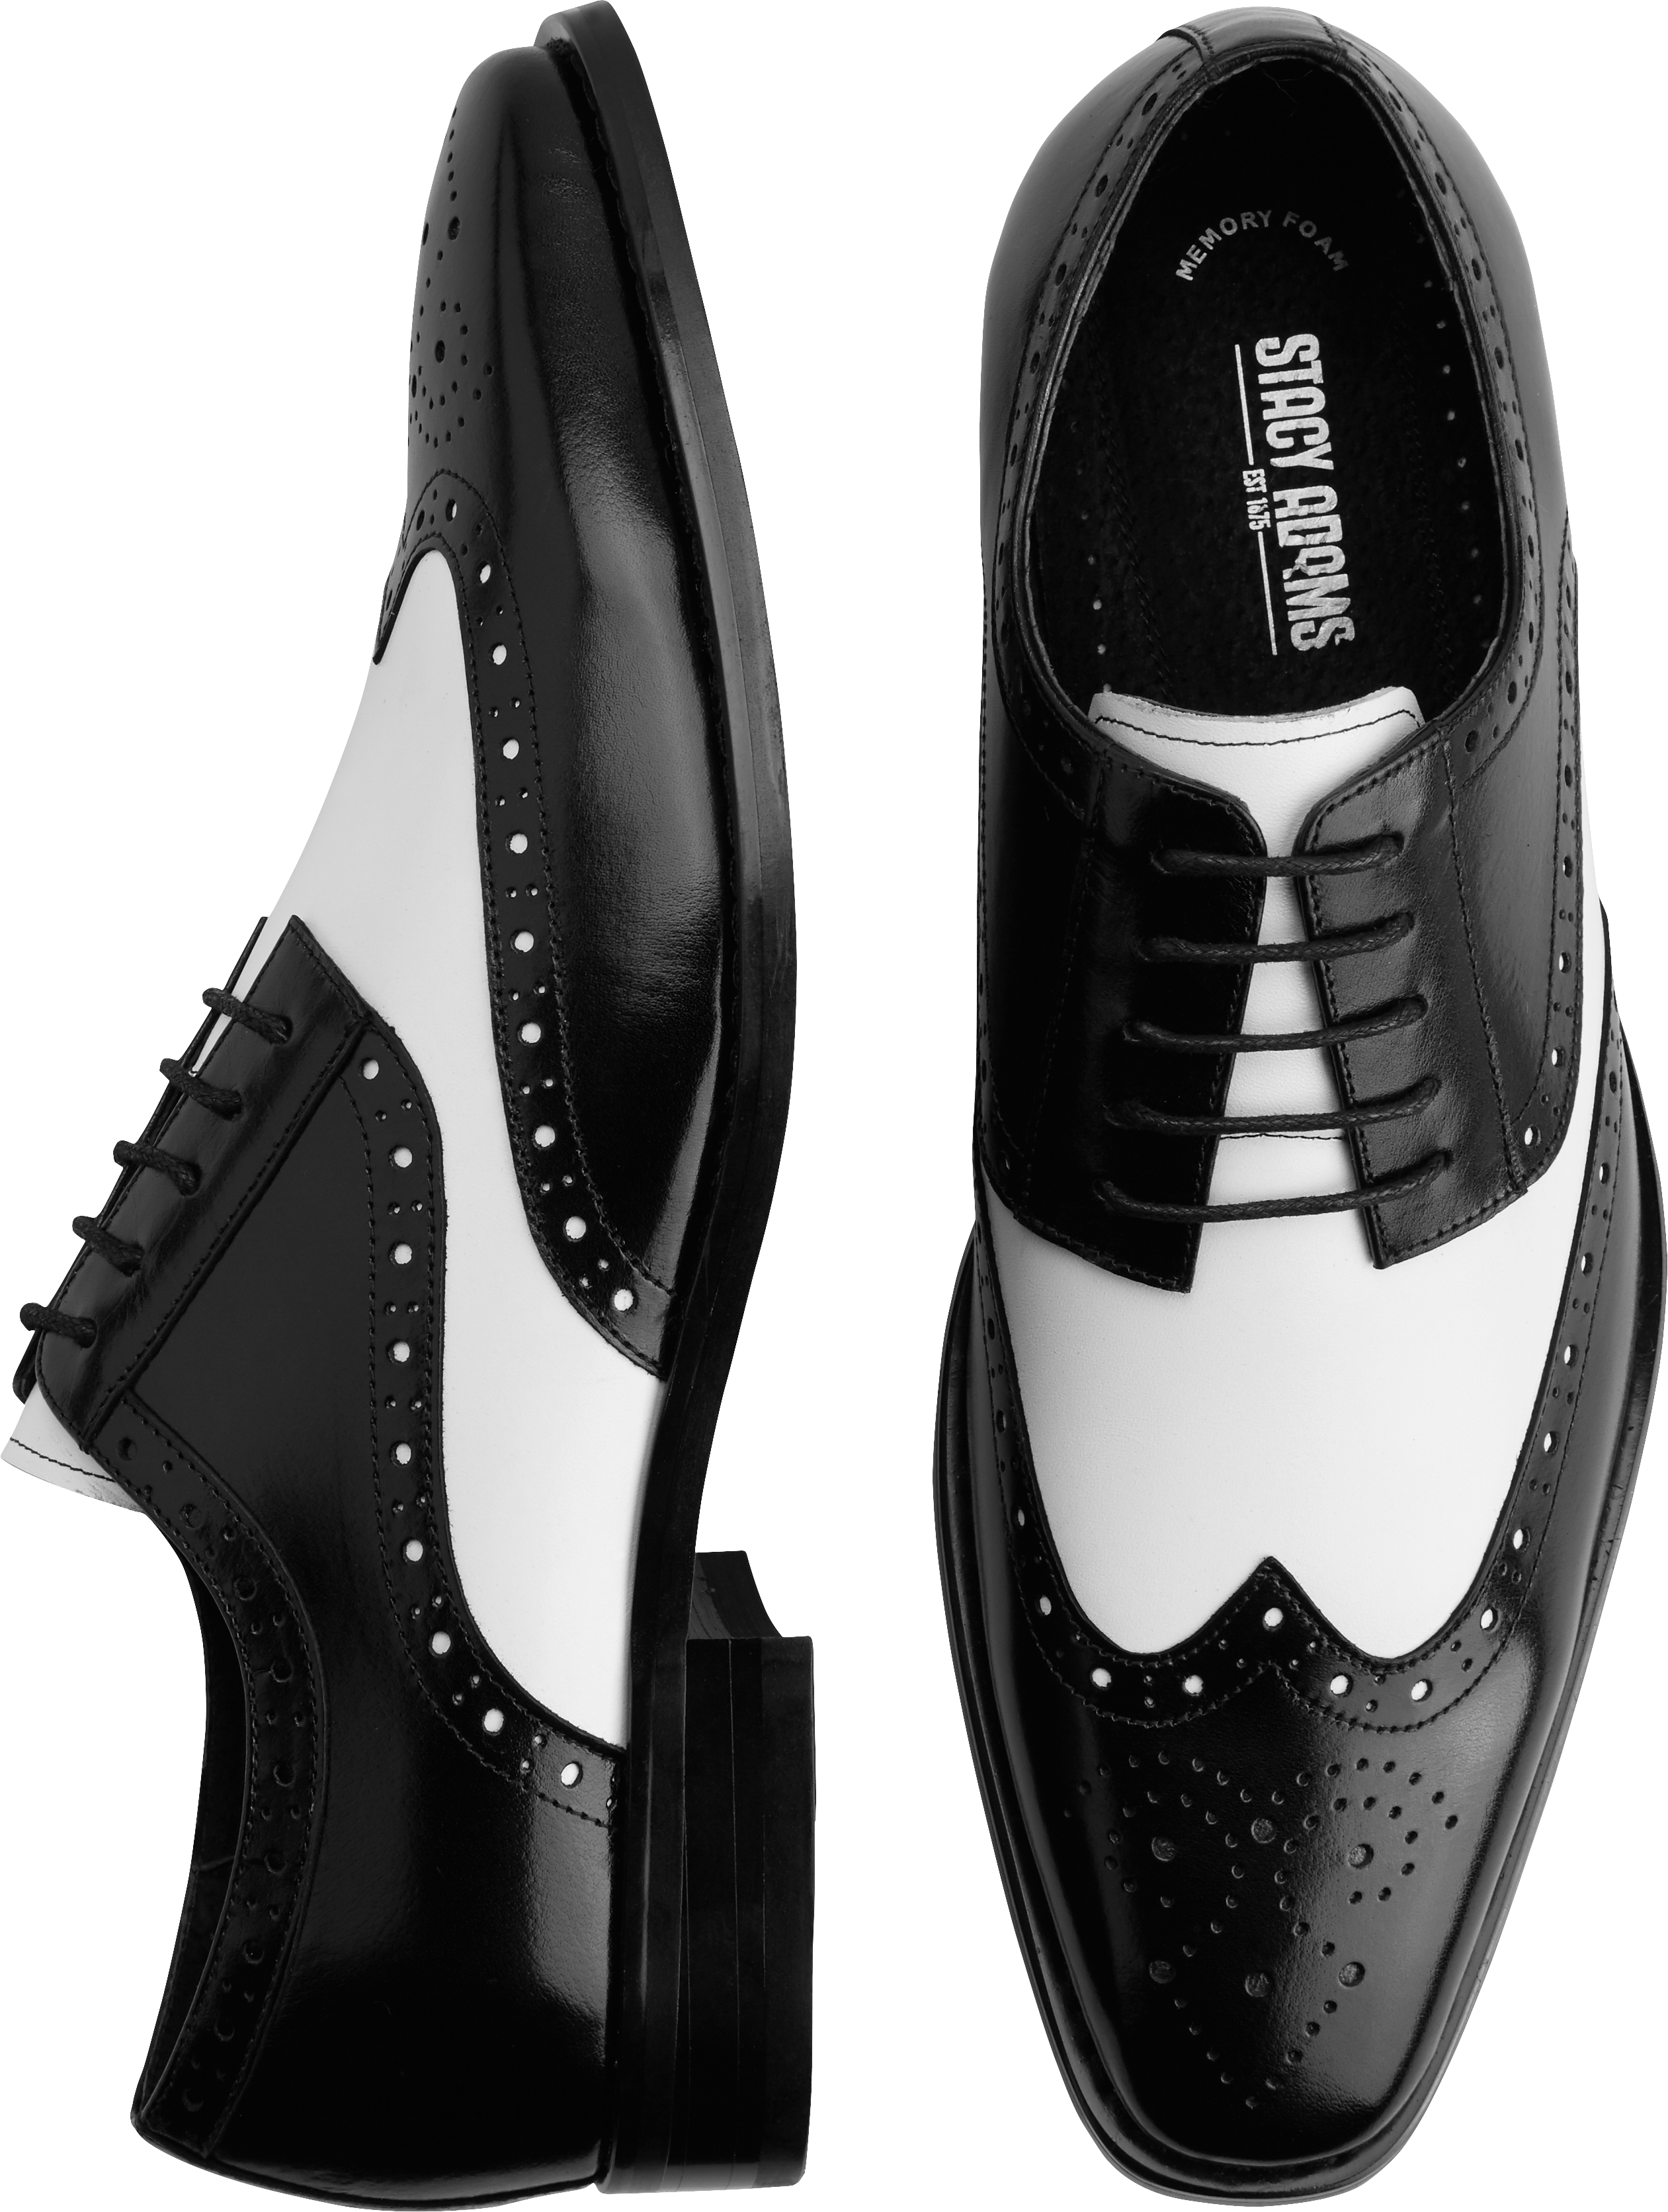 white wingtip shoes